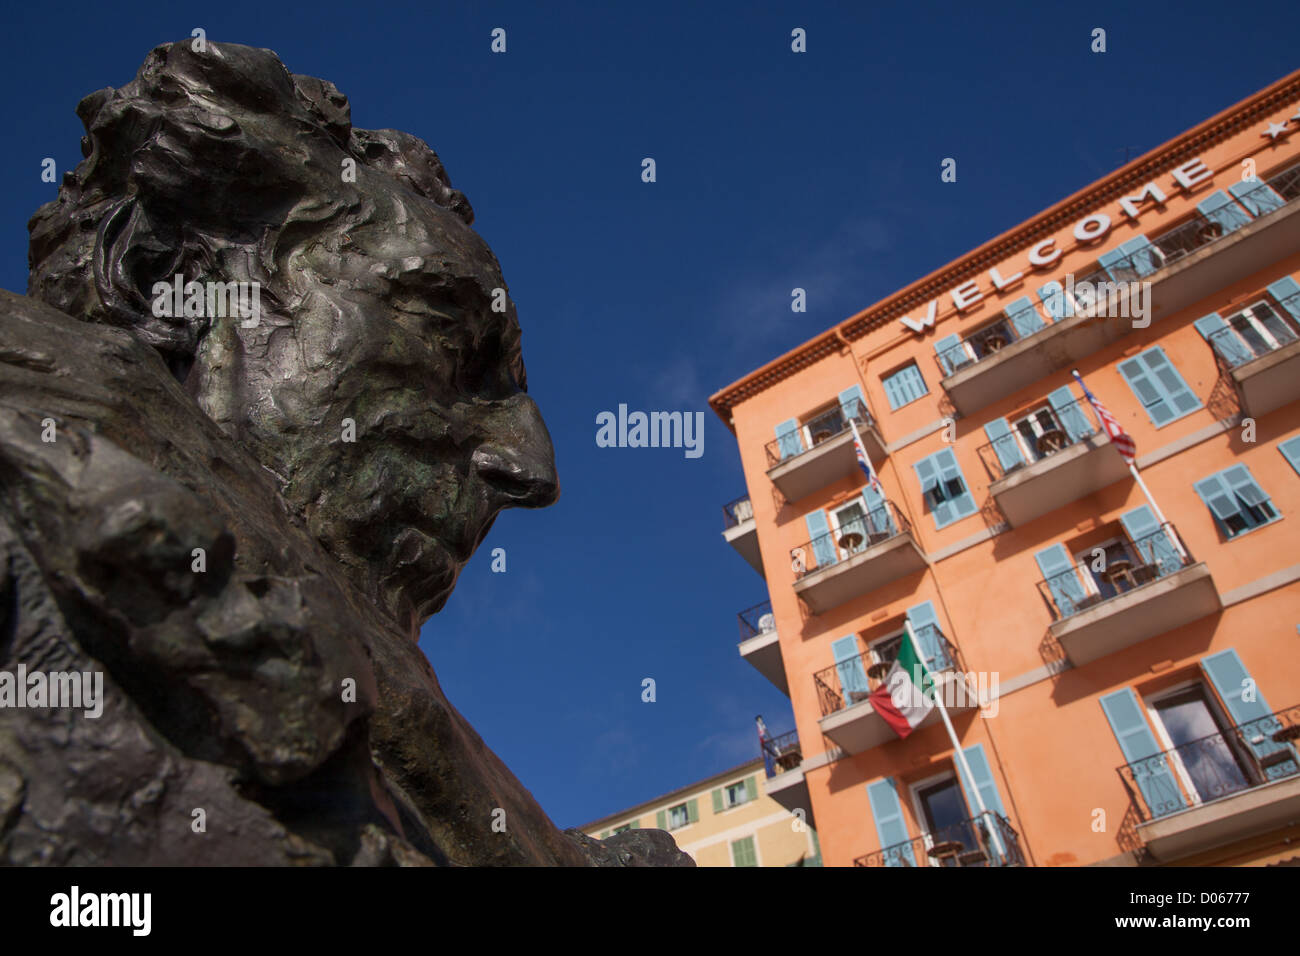 BUST OF JEAN COCTEAU IN FRONT OF THE HOTEL WELCOME WHERE HE OFTEN STAYED VILLEFRANCHE-SUR-MER ALPES-MARITIMES (06) FRANCE Stock Photo